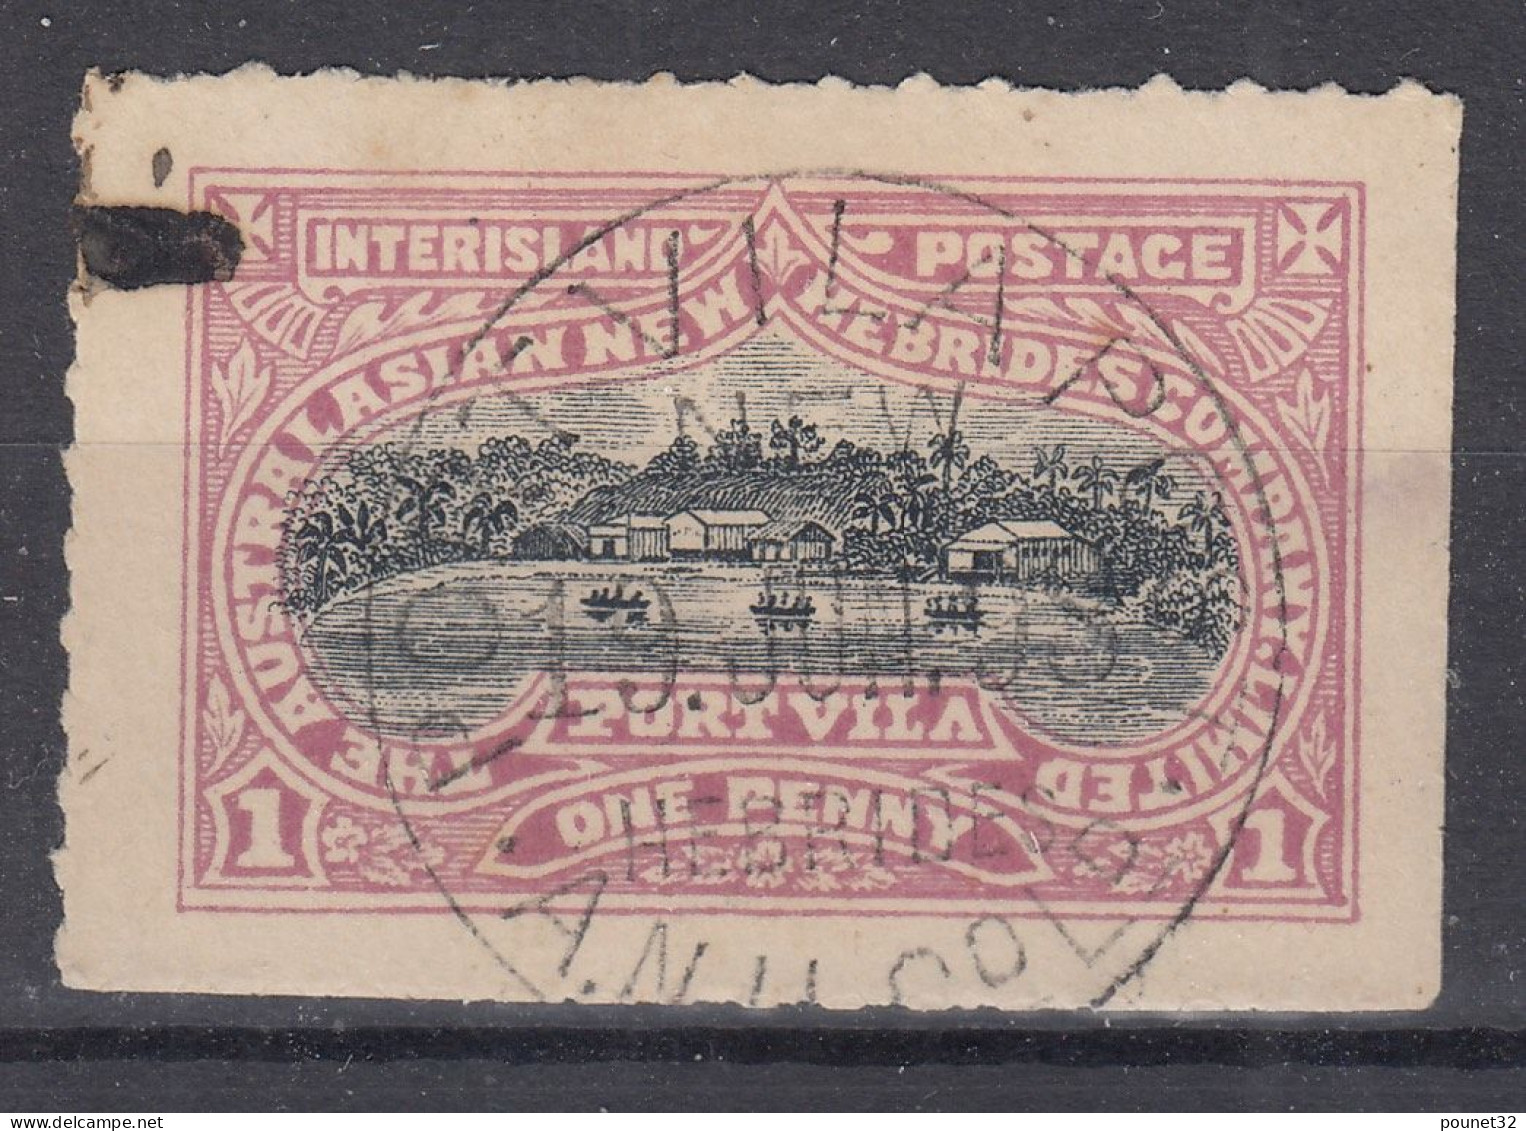 NLLES NEW HEBRIDES POSTE LOCALE ANGLAISE N° 1 OBLITERATION CHOISIE - COTE 350 € - Used Stamps